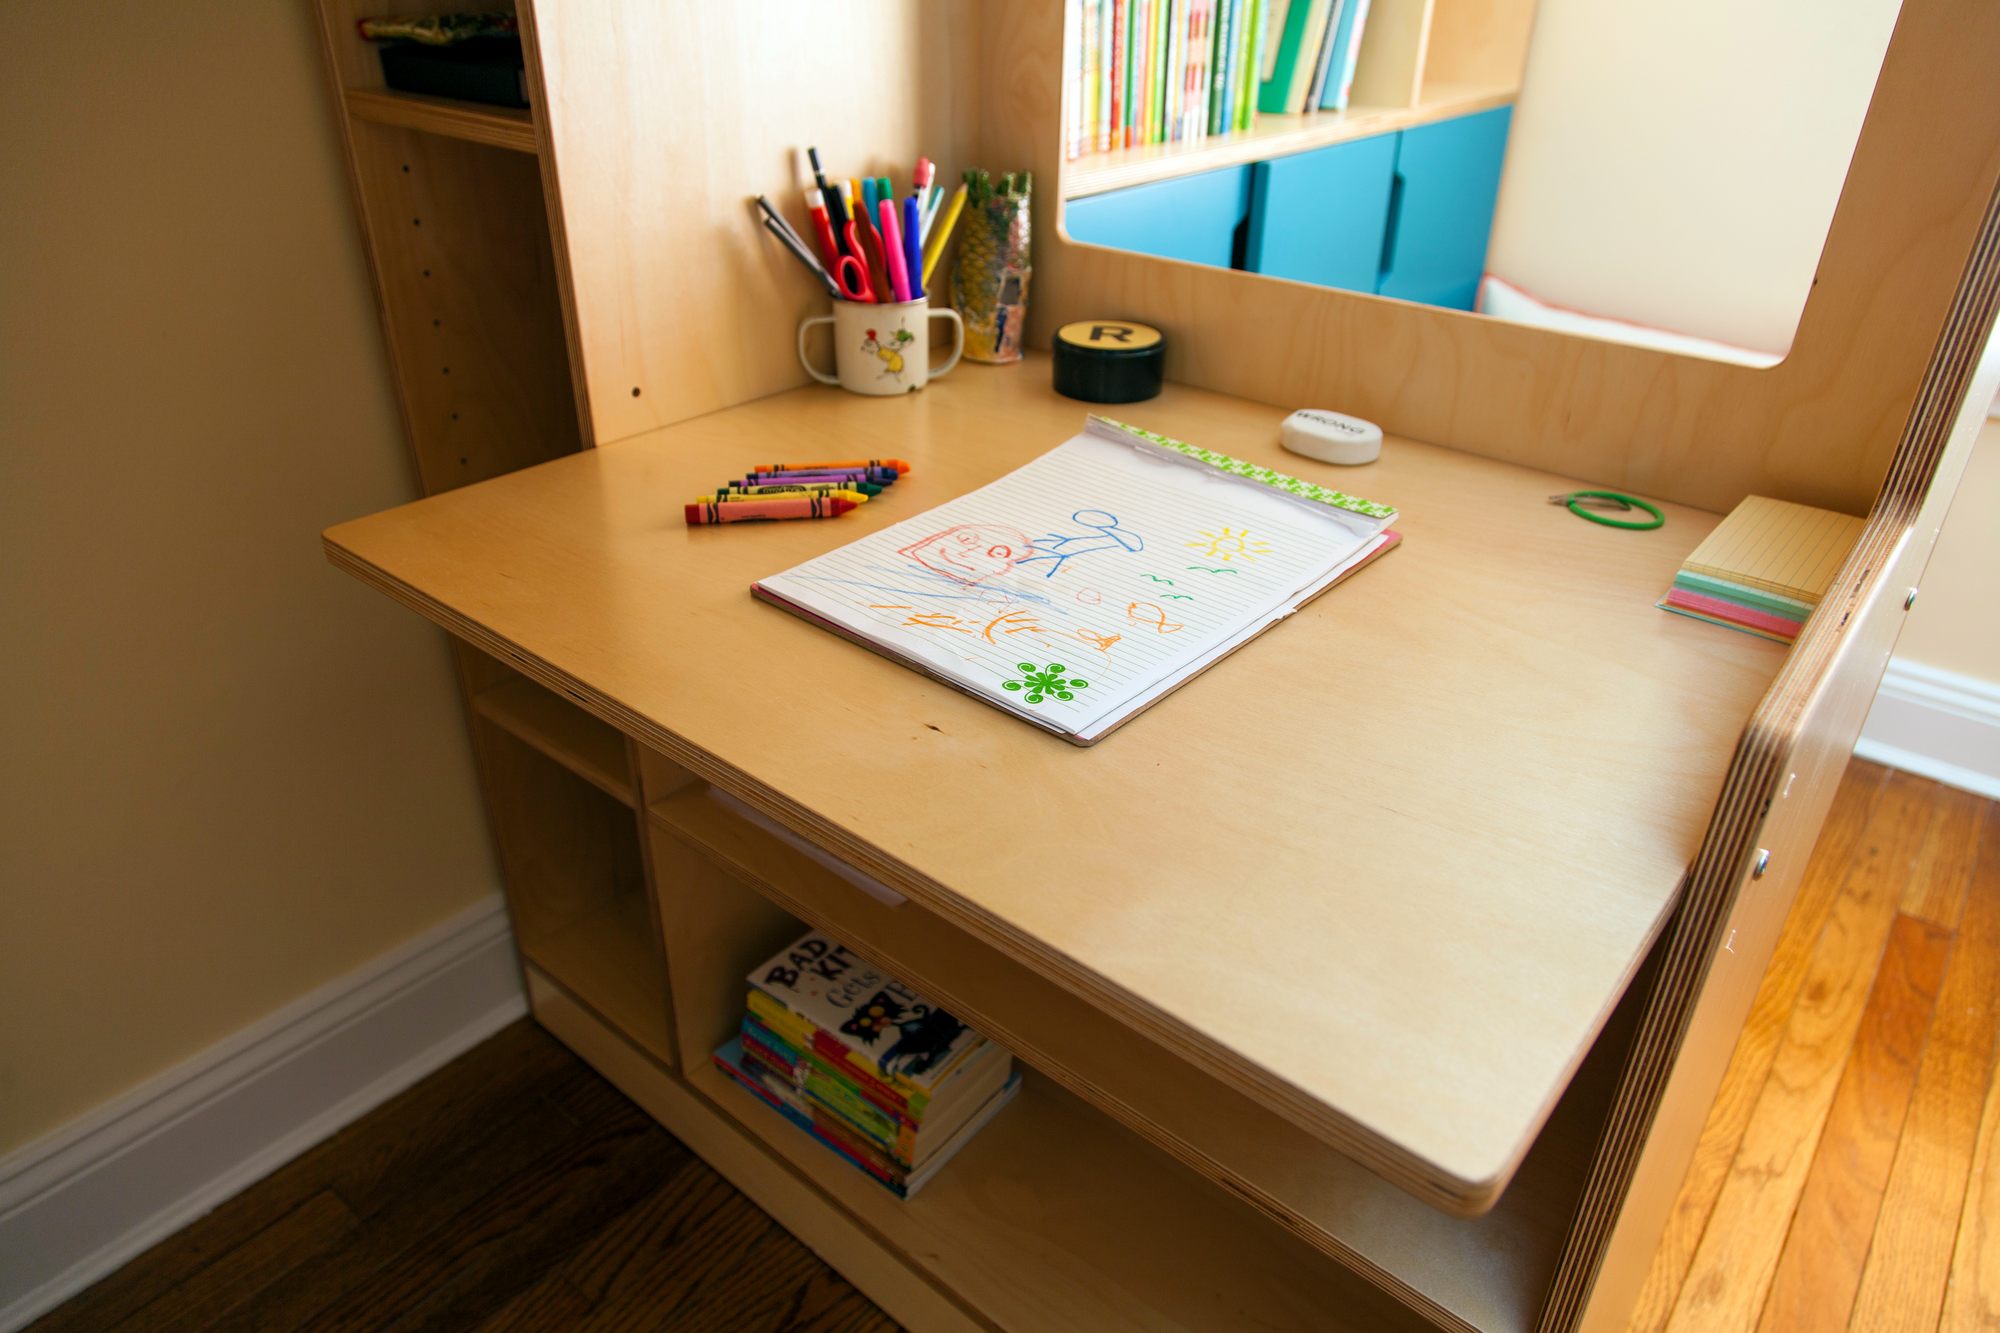 A small wooden study desk with colored pencils and a drawing book, positioned near shelves with books in a bright room.